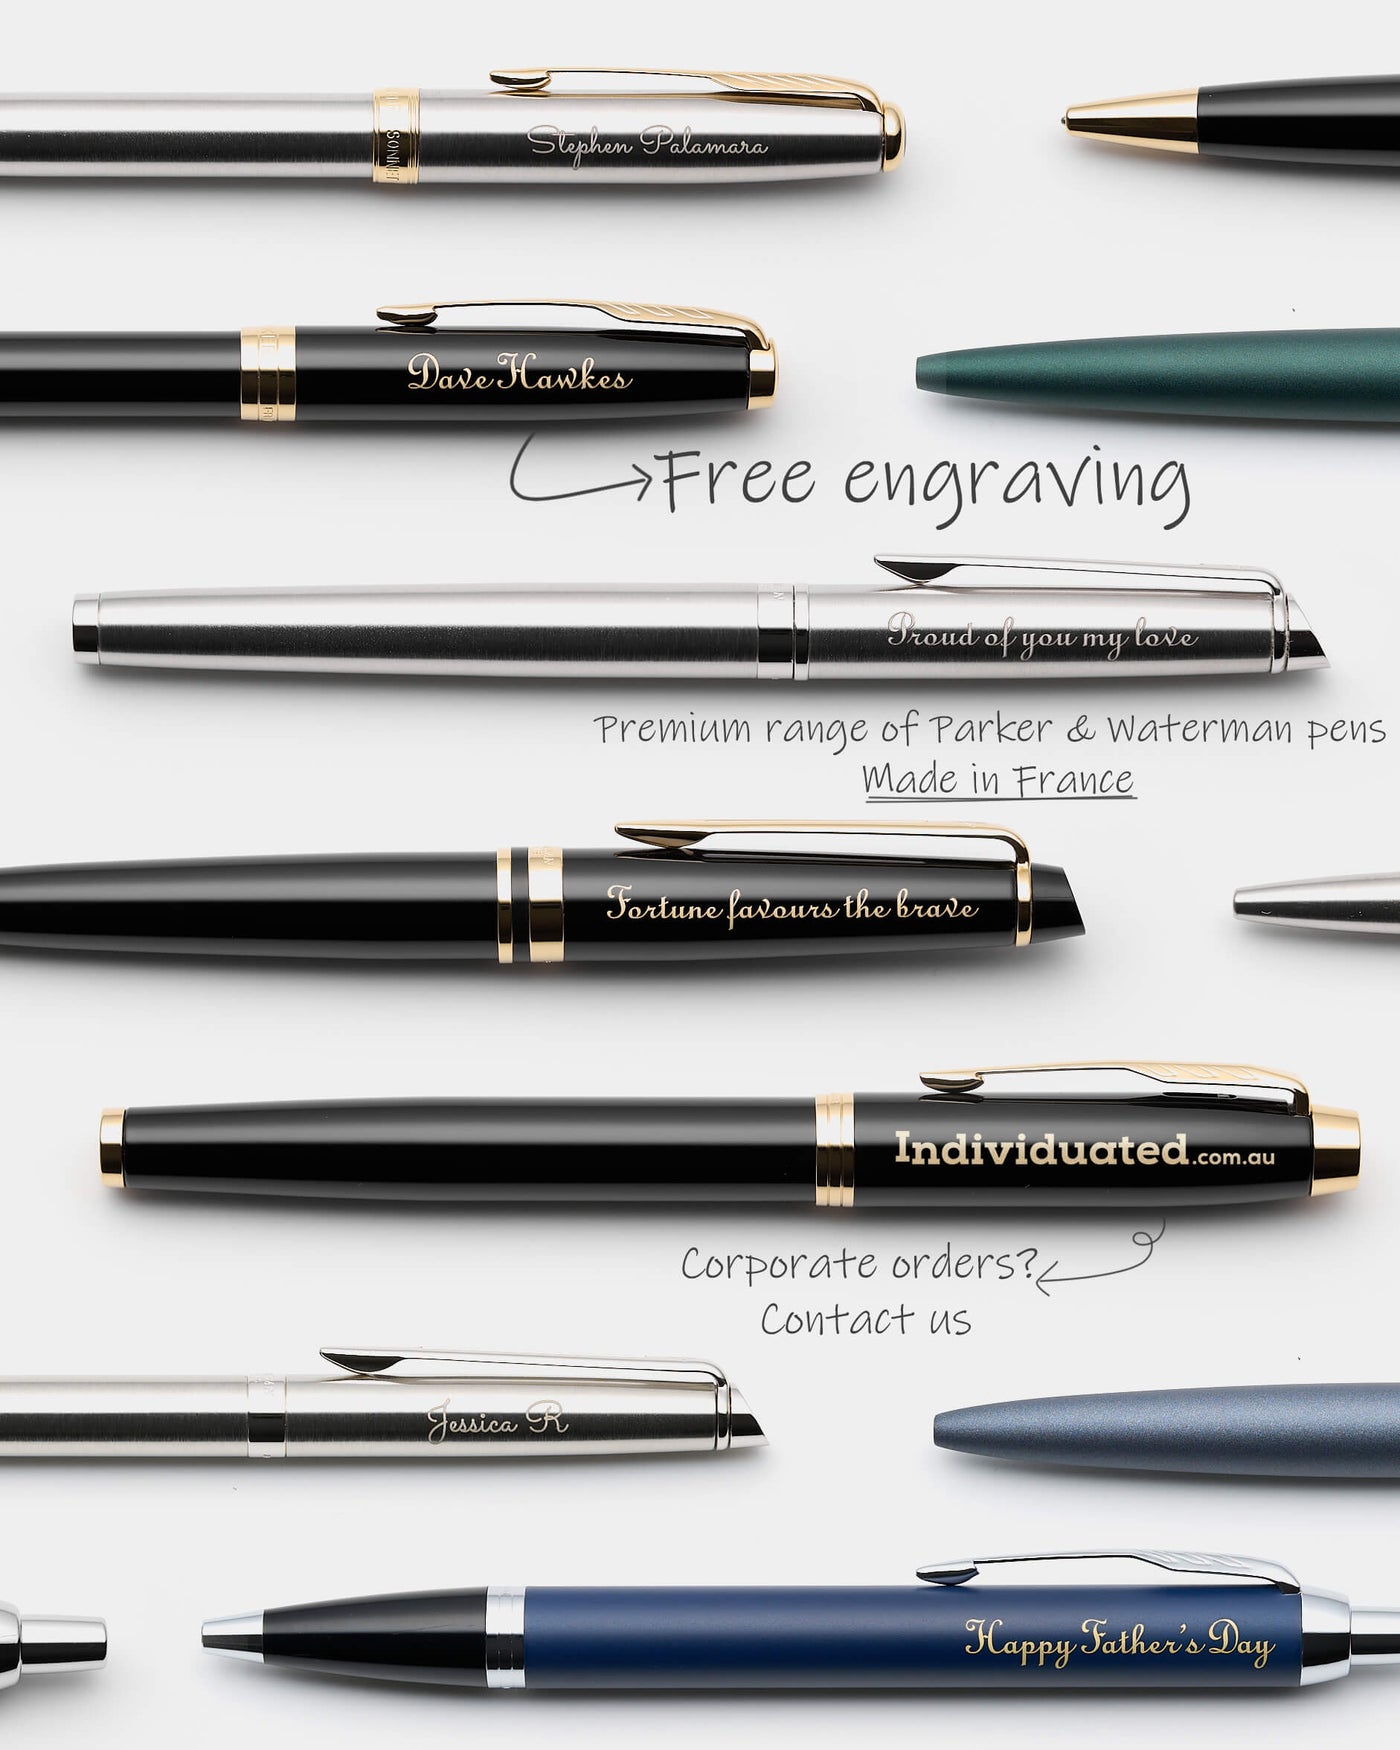 Engraved Parker pens and Waterman pens with free personalisation engraving, corporate promotional pens